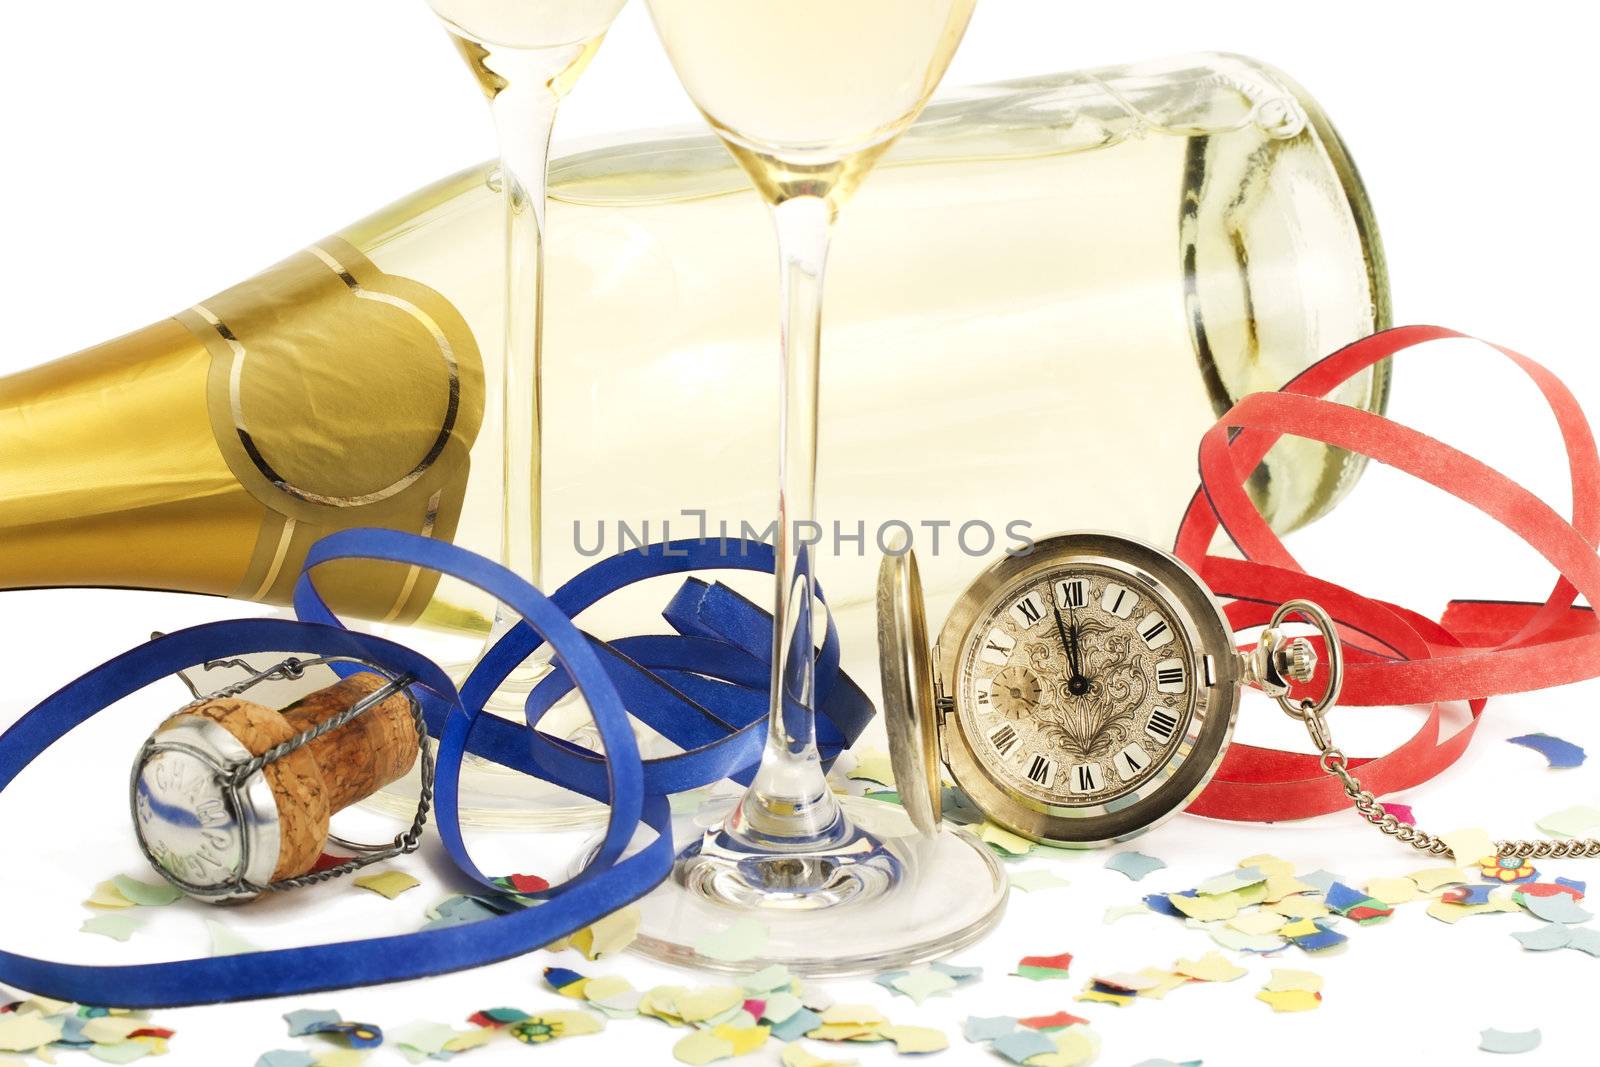 two glasses with champagne, old pocket watch, streamer, cork and confetti in front of a champagne bottle on white background